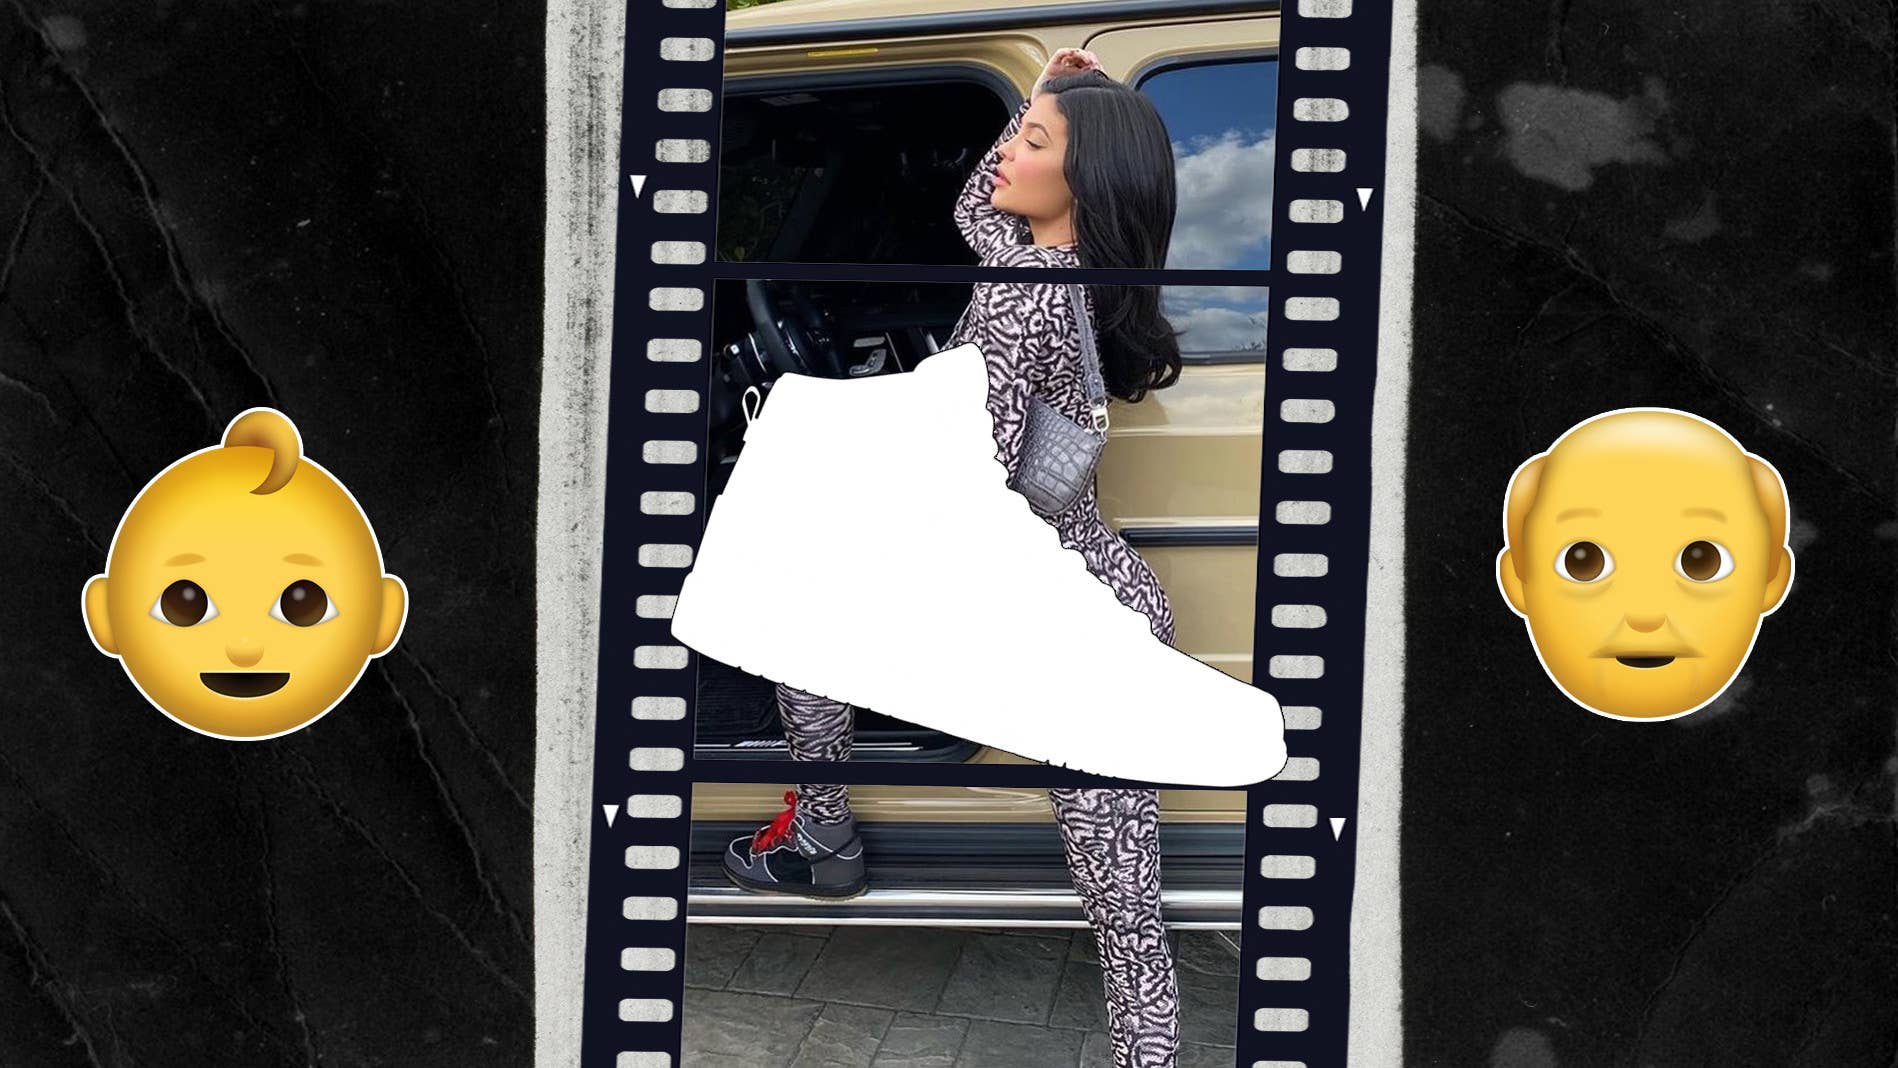 Kylie Jenner's Adidas trainers are finally here… but they don't